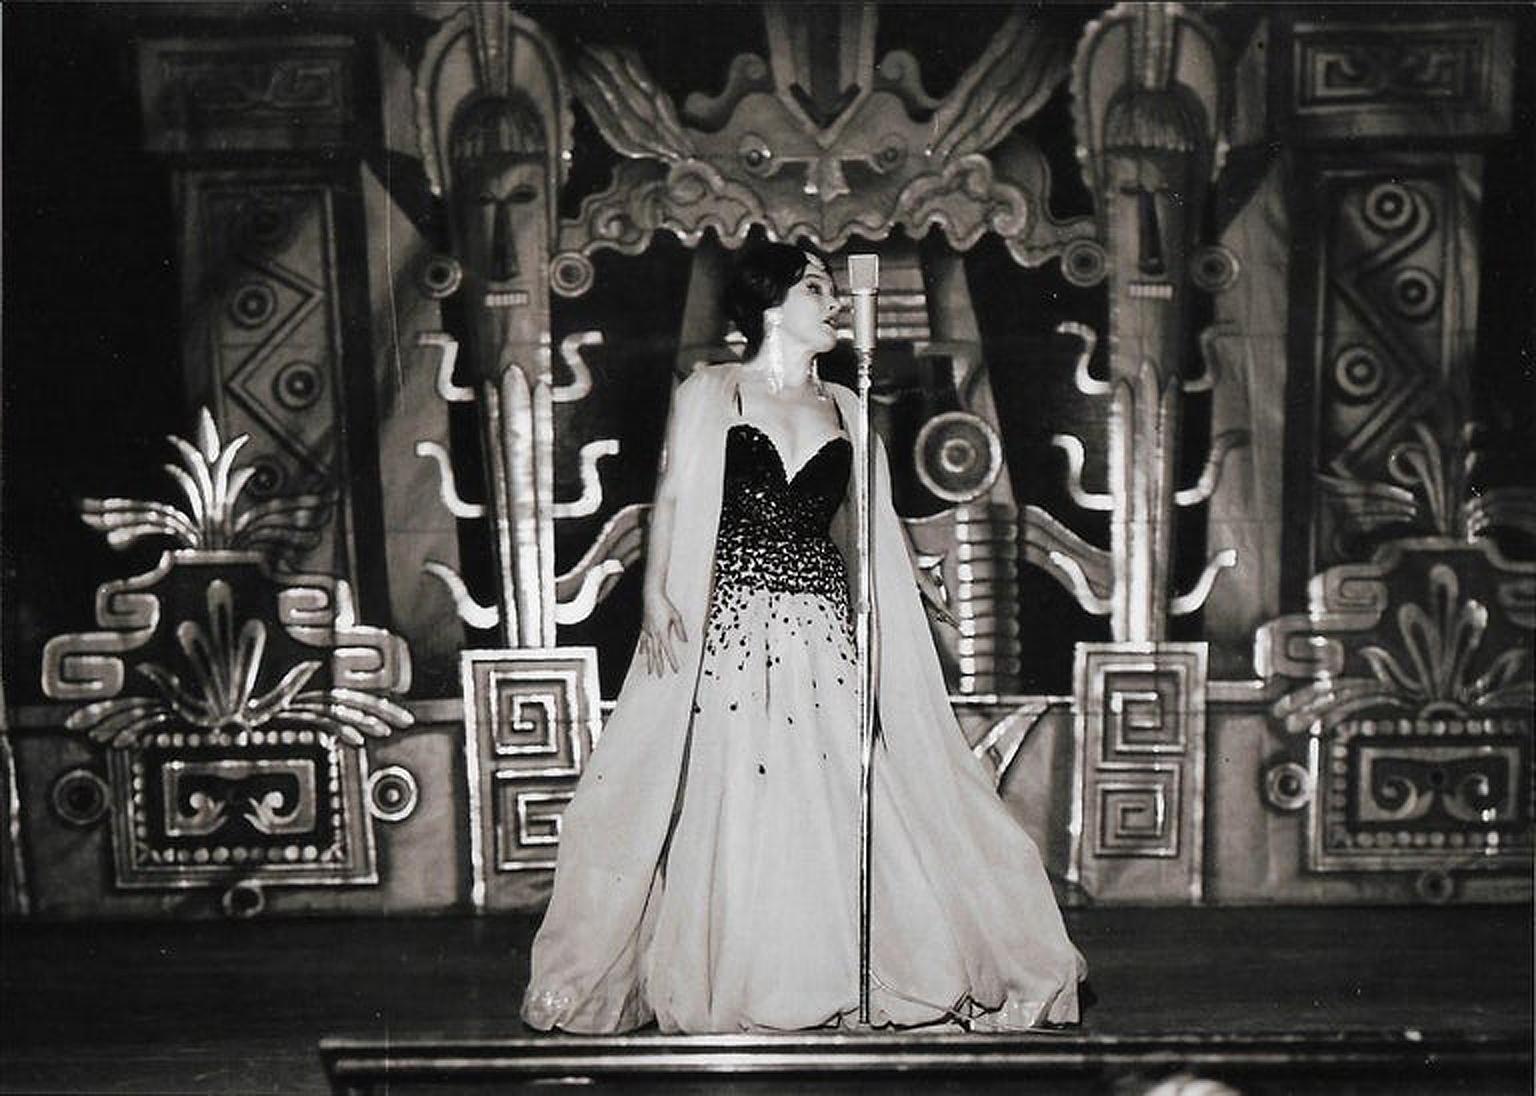 A truly breathtaking and one-of-a-kind creation by German couture designer Marie Latz. This special two-piece voluminous gown ensemble was custom made for Yma Sumac's 1954 sold out performance in Berlin. Yma Sumac (1922–2008) was a noted Peruvian